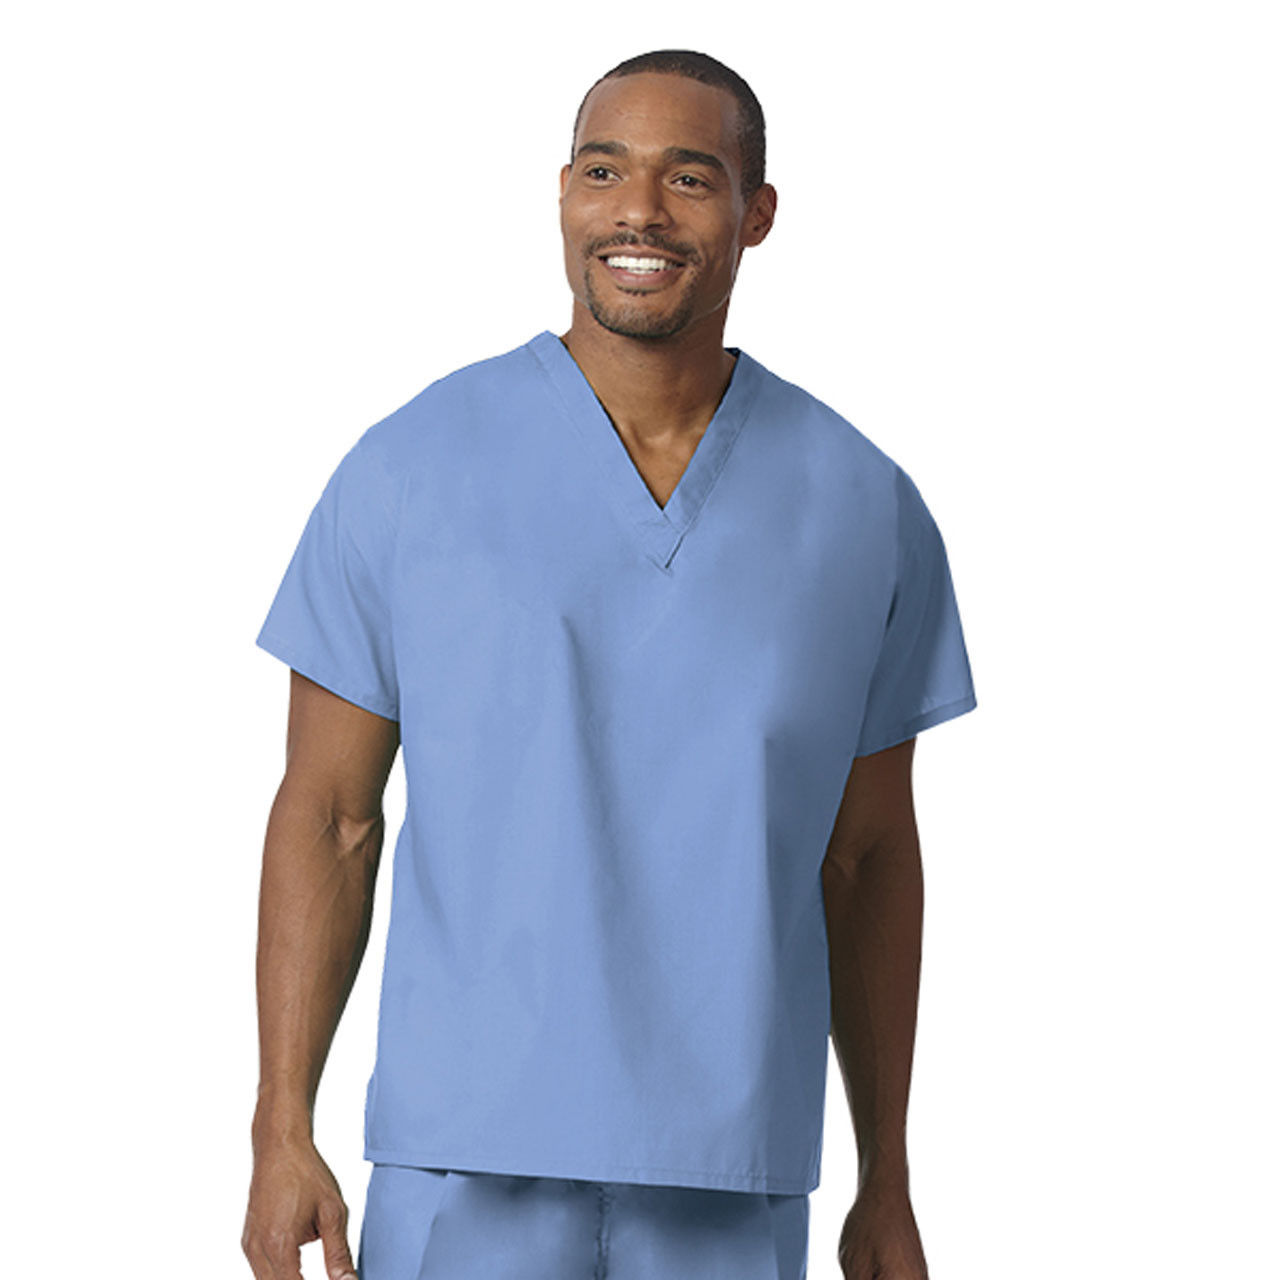 What features are included in the Ceil Blue Unisex Reversible, No Pocket, blue surgical scrubs set?